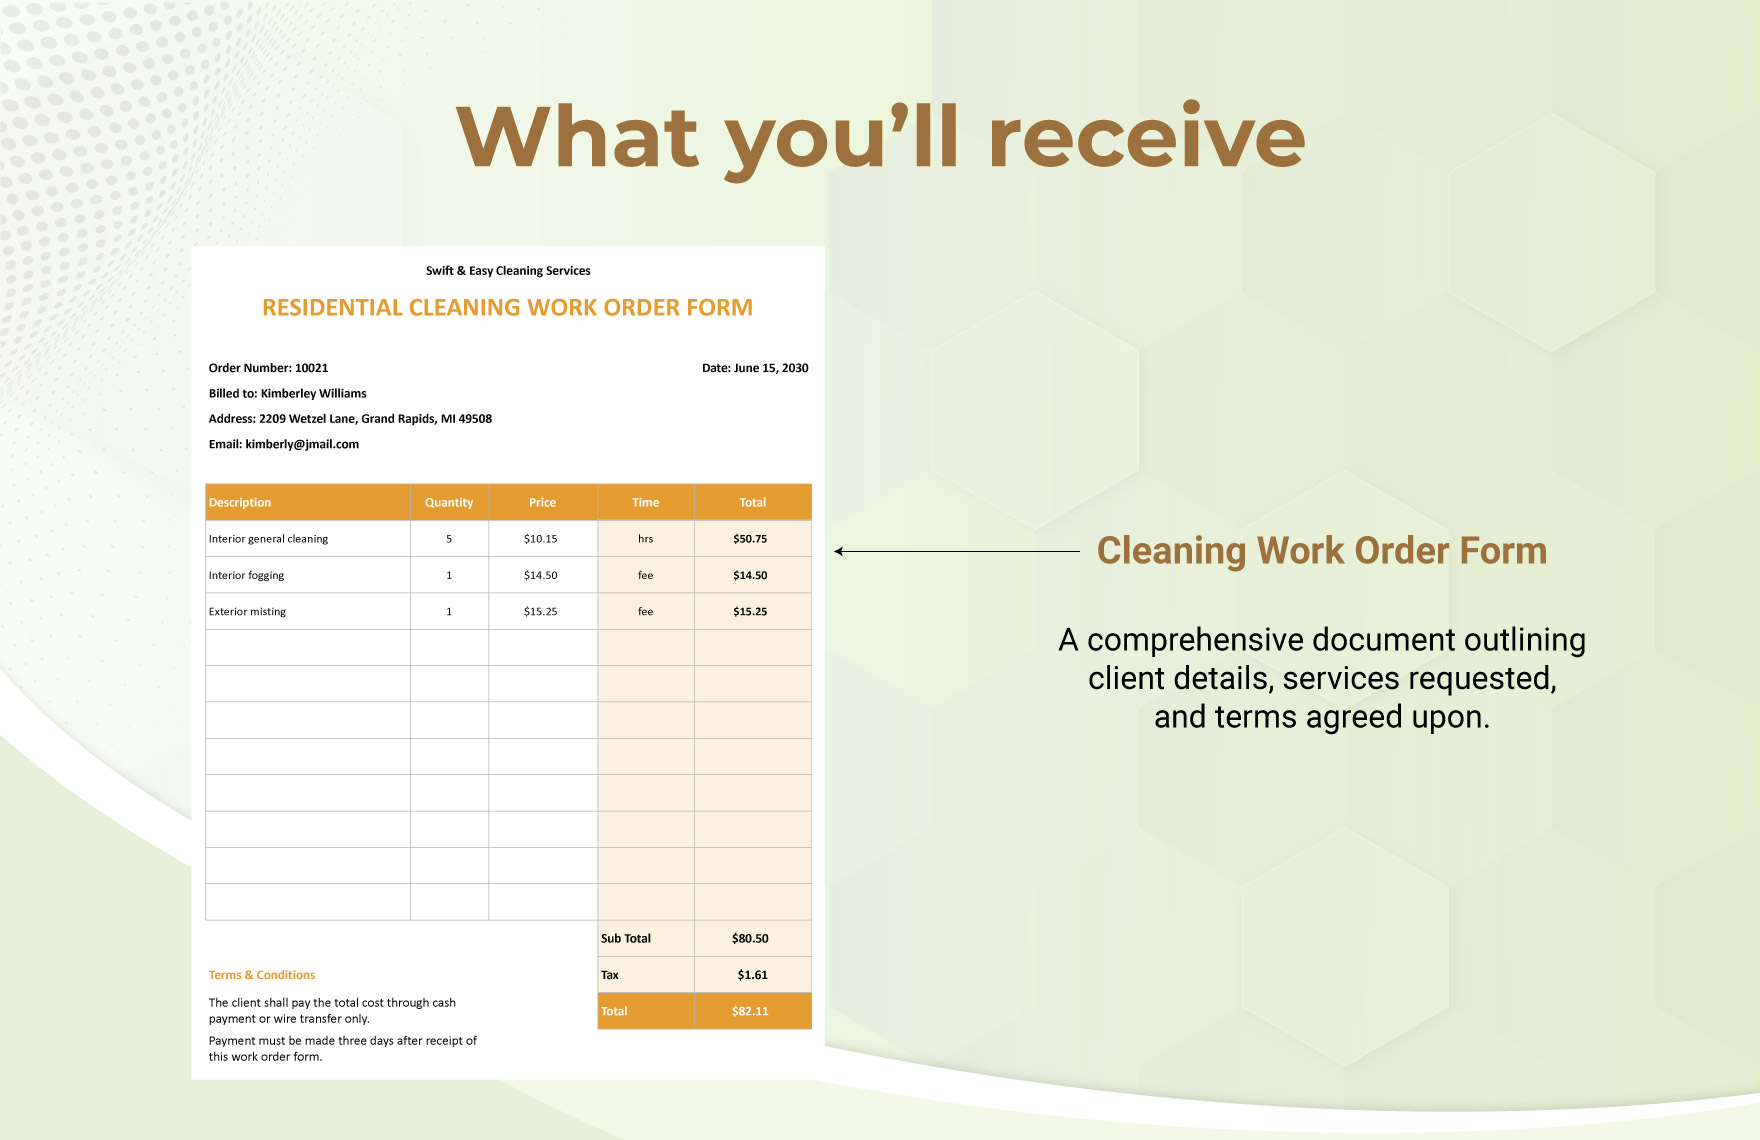 Residential Cleaning Work Order Template